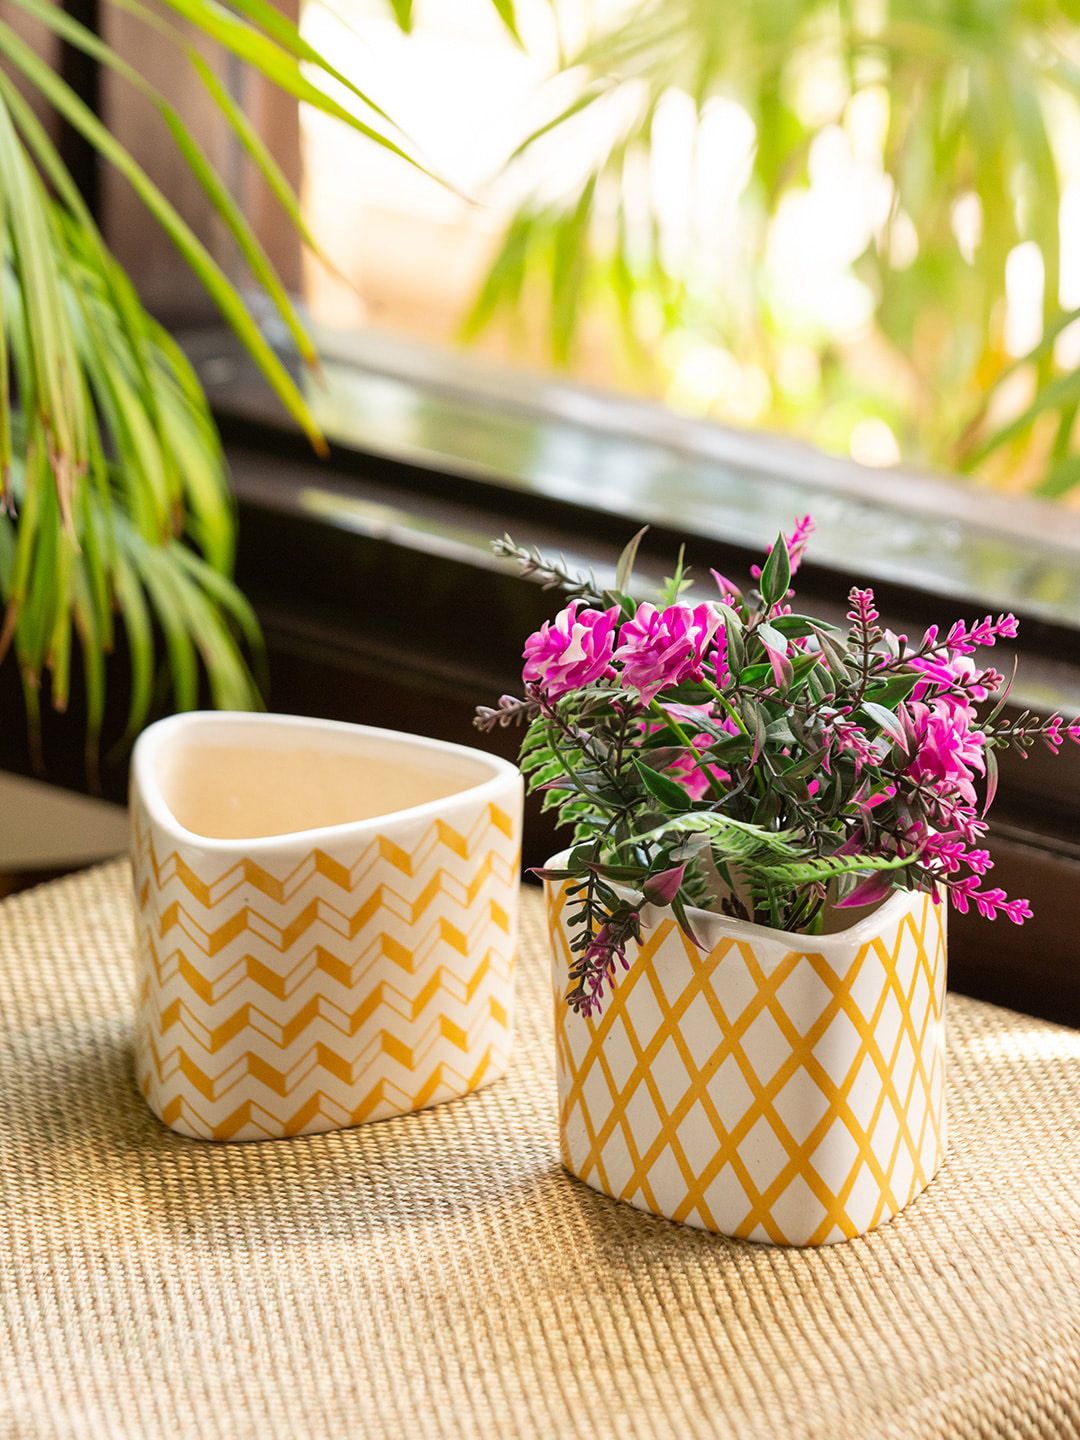 ExclusiveLane Set Of 2 Orange Printed Handcrafted Painted Ceramic Table Planters Price in India